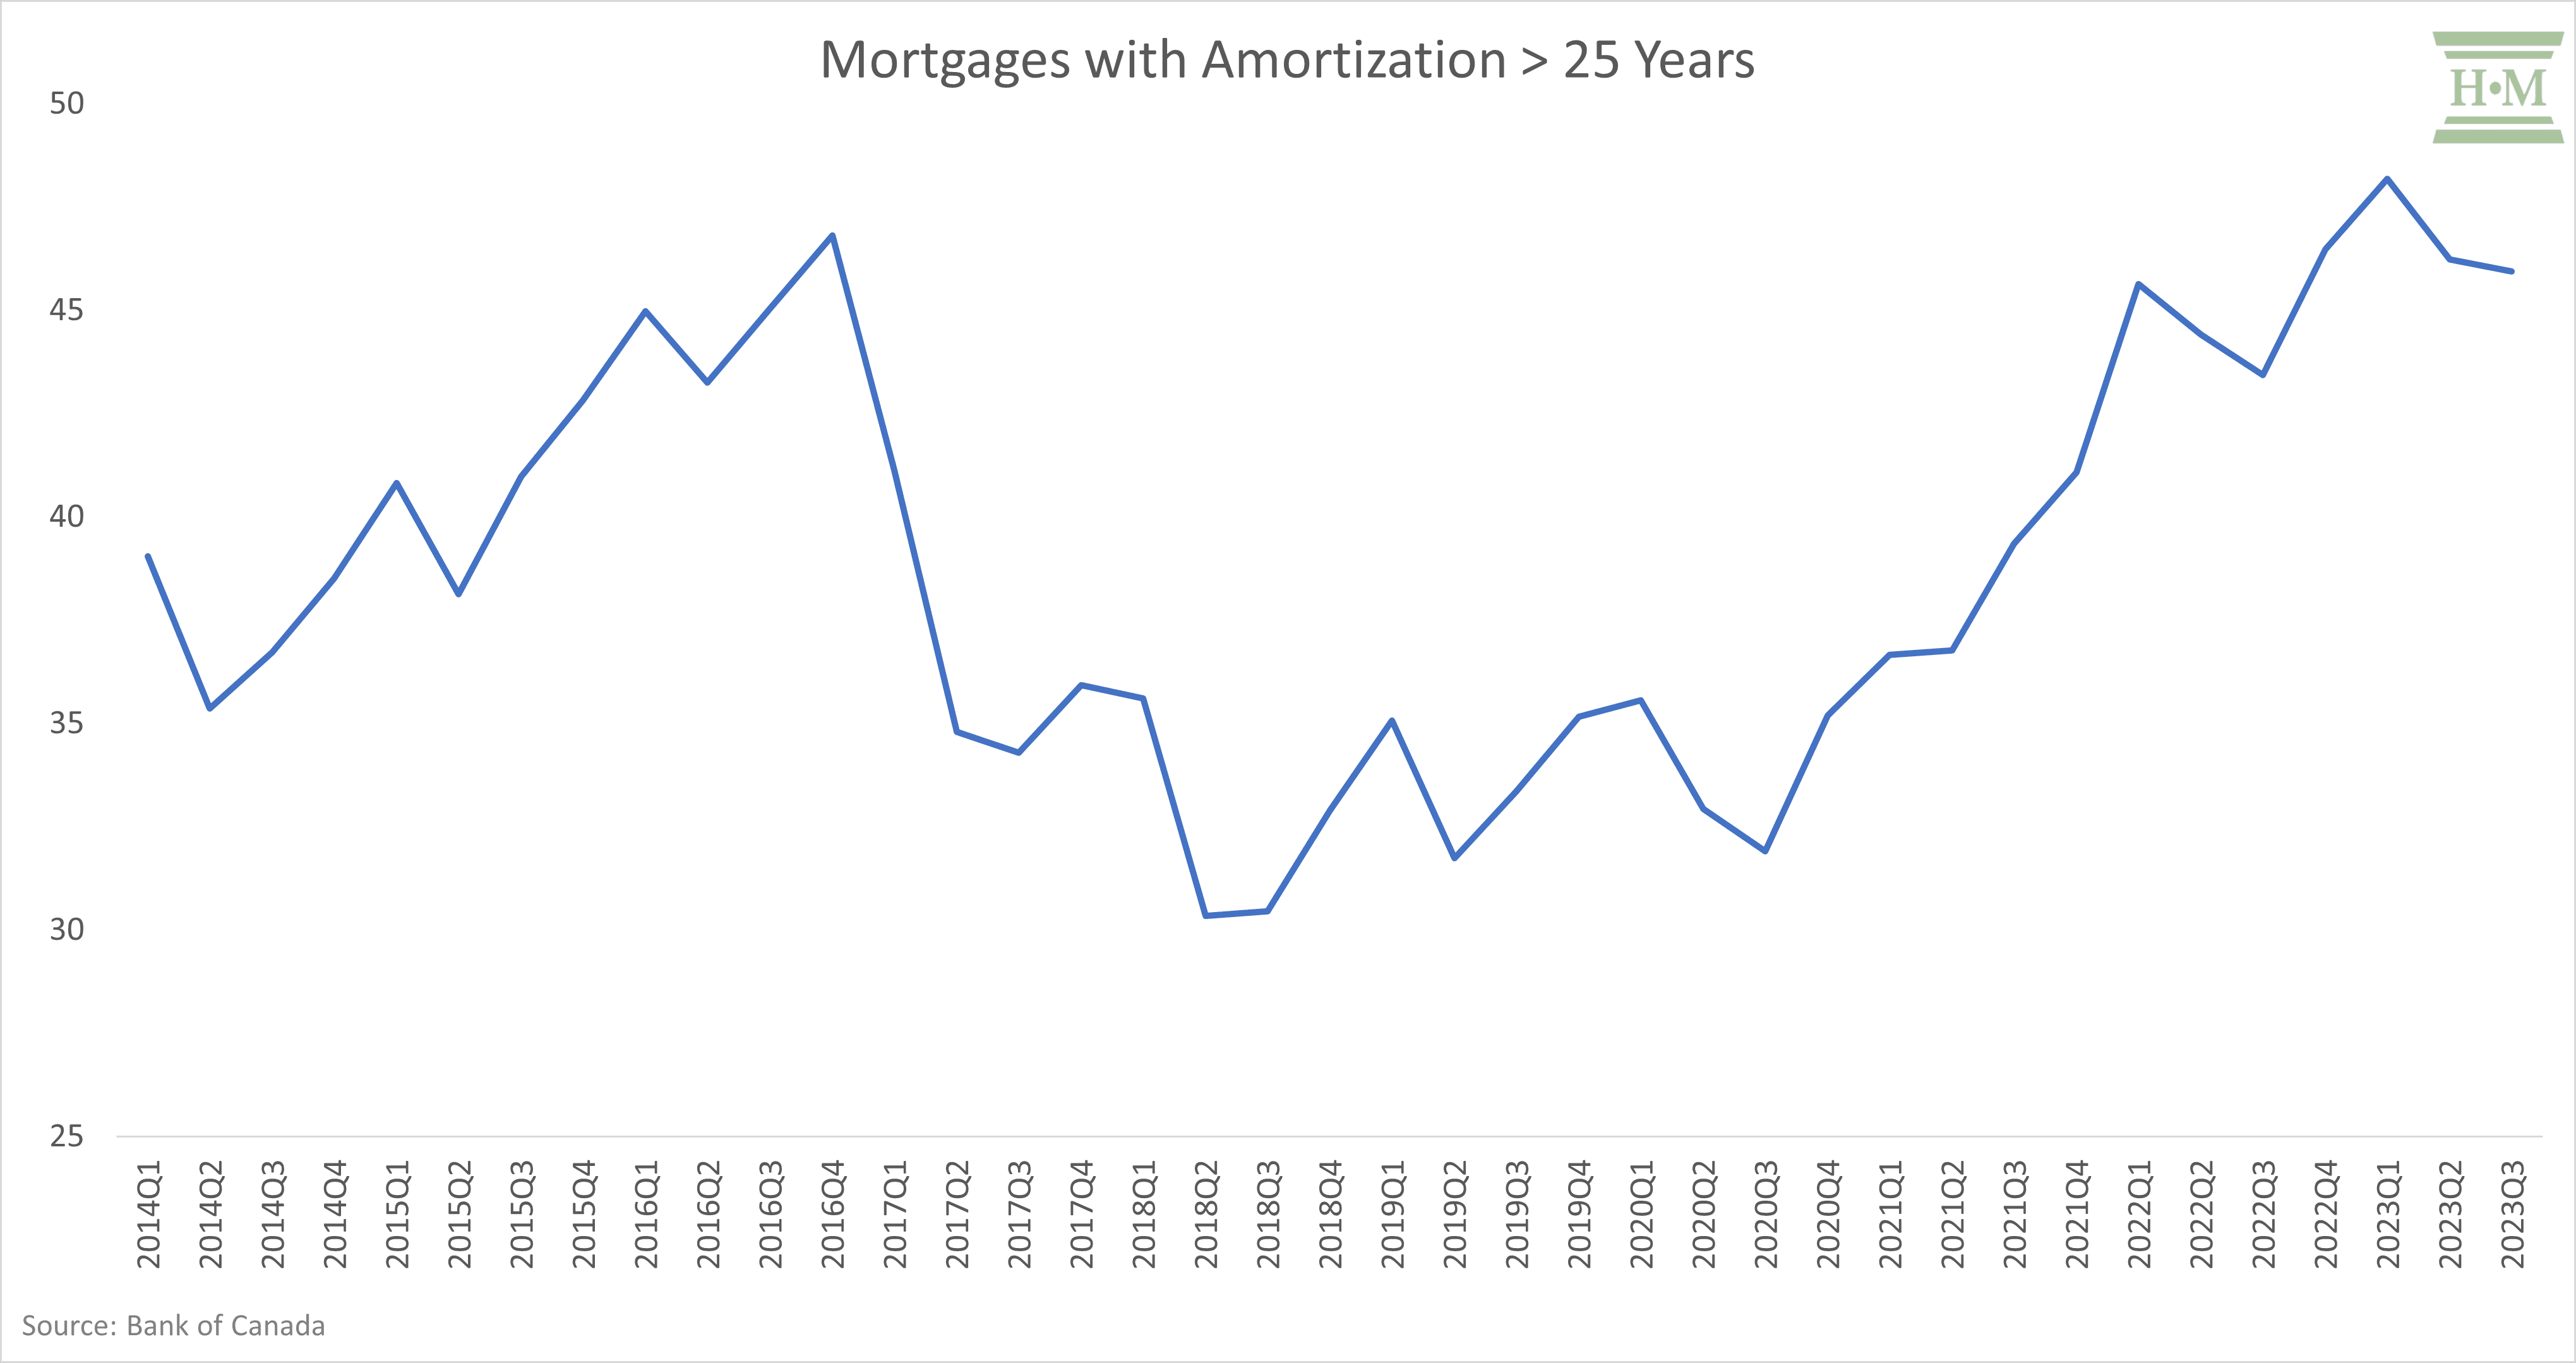 Mortgages with Amortization 25 Years